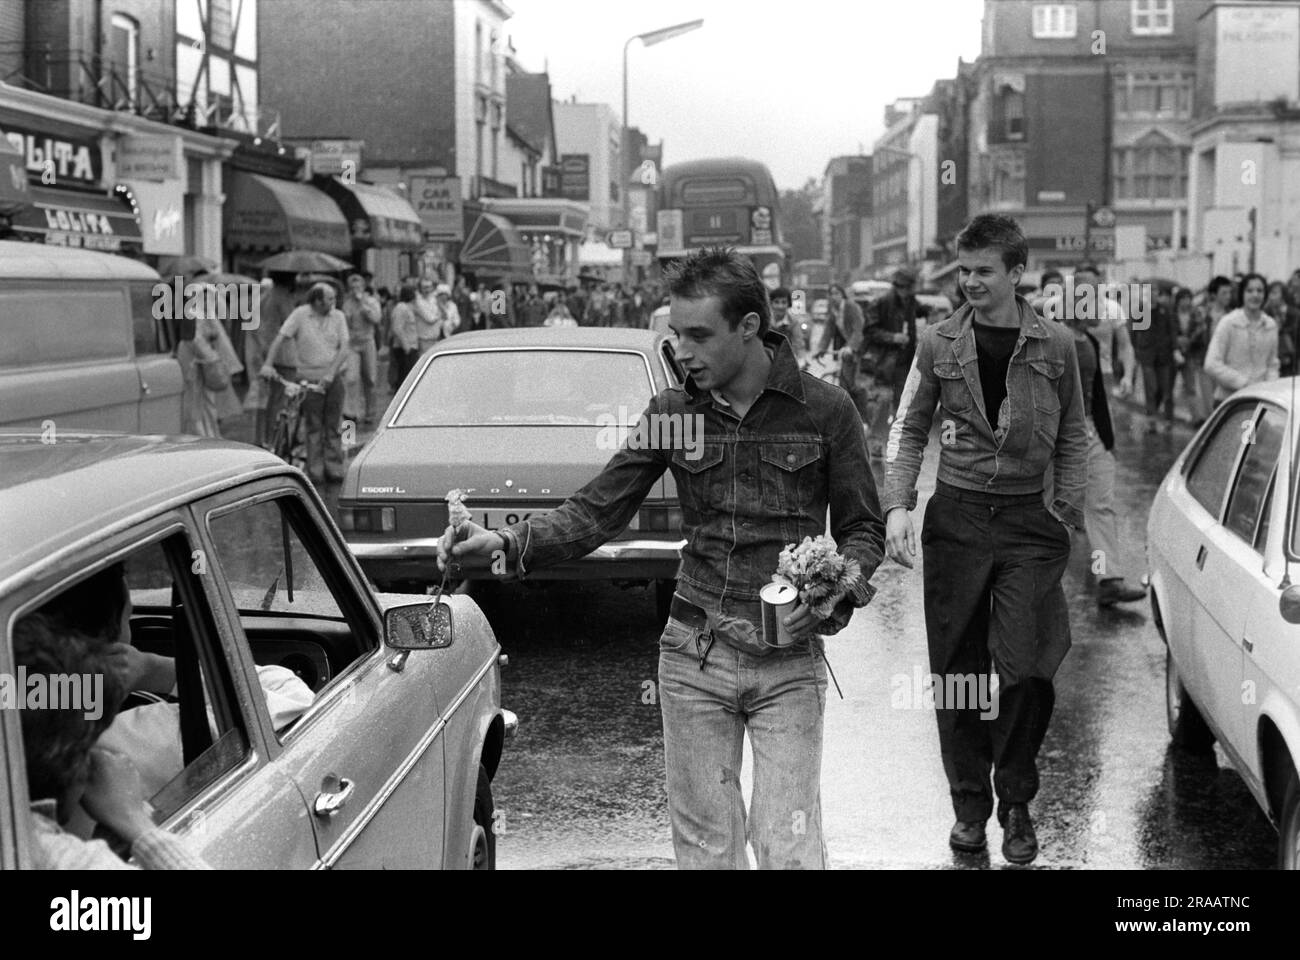 Punk, Mick Bladder hands out flowers to passing car drivers stuck in traffic in the Kings Road, Chelsea. A traffic jam they have caused by walking down the middle of the road. London, England circa 1977 1970s UK HOMER SYKES Stock Photo